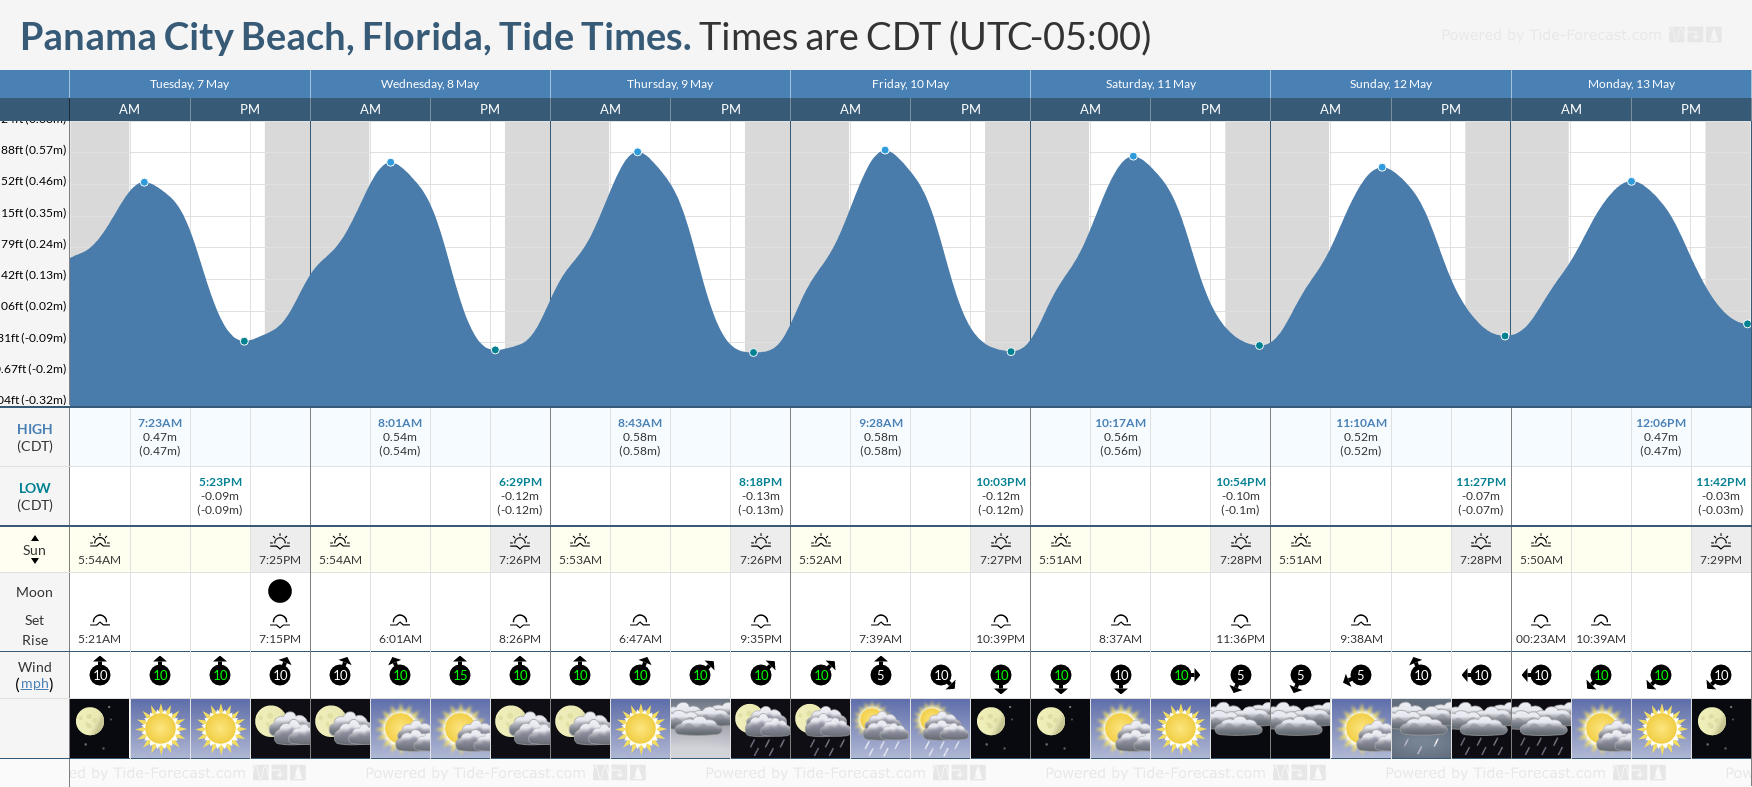 Panama City Beach, Florida Tide Chart including high and low tide tide times for the next 7 days